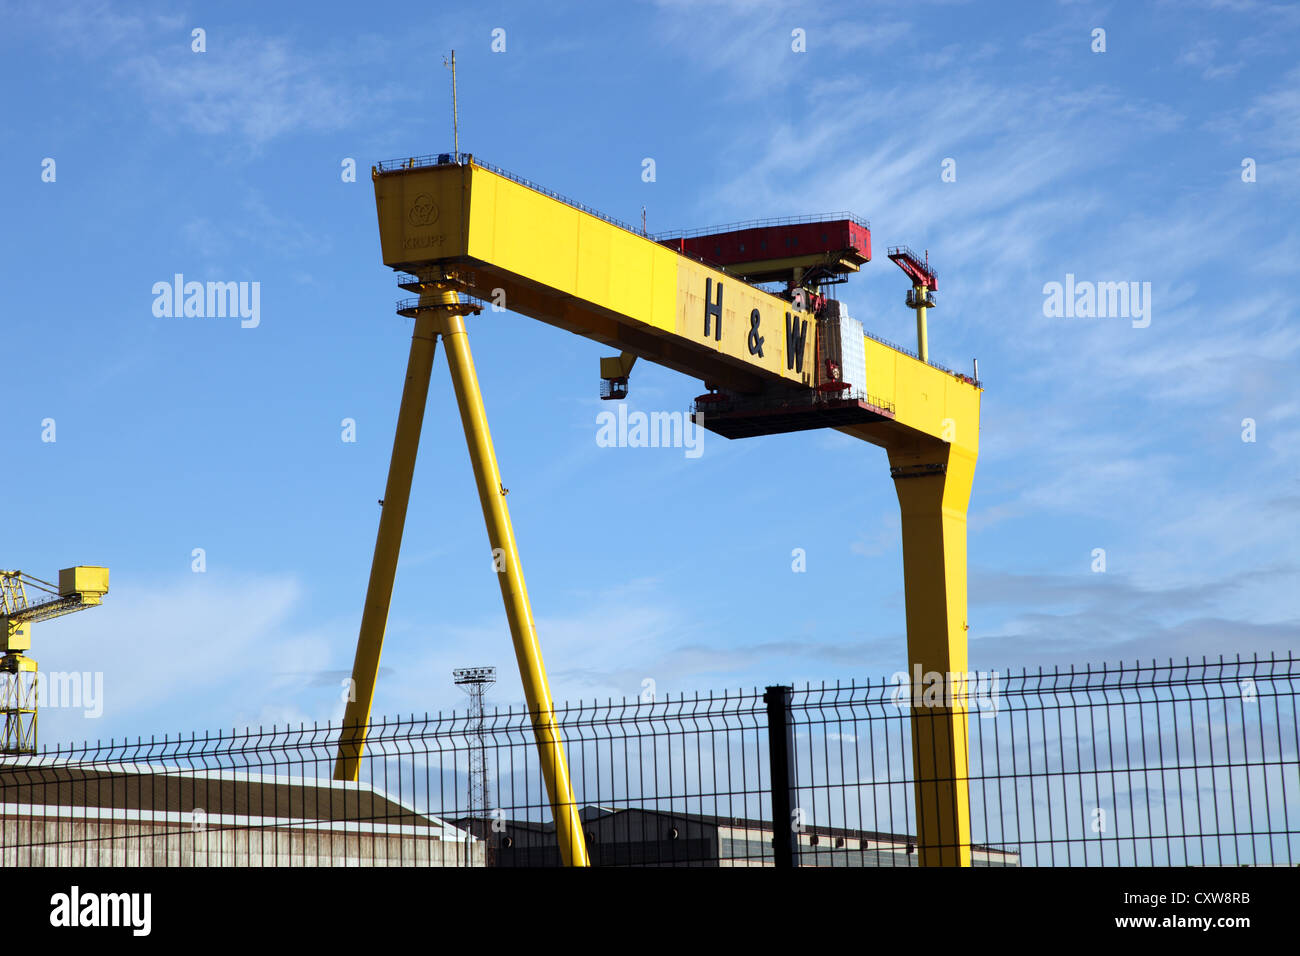 One of two Harland and Woolf cranes nicknamed Samson and Goliath, Belfast, Northern Ireland Stock Photo